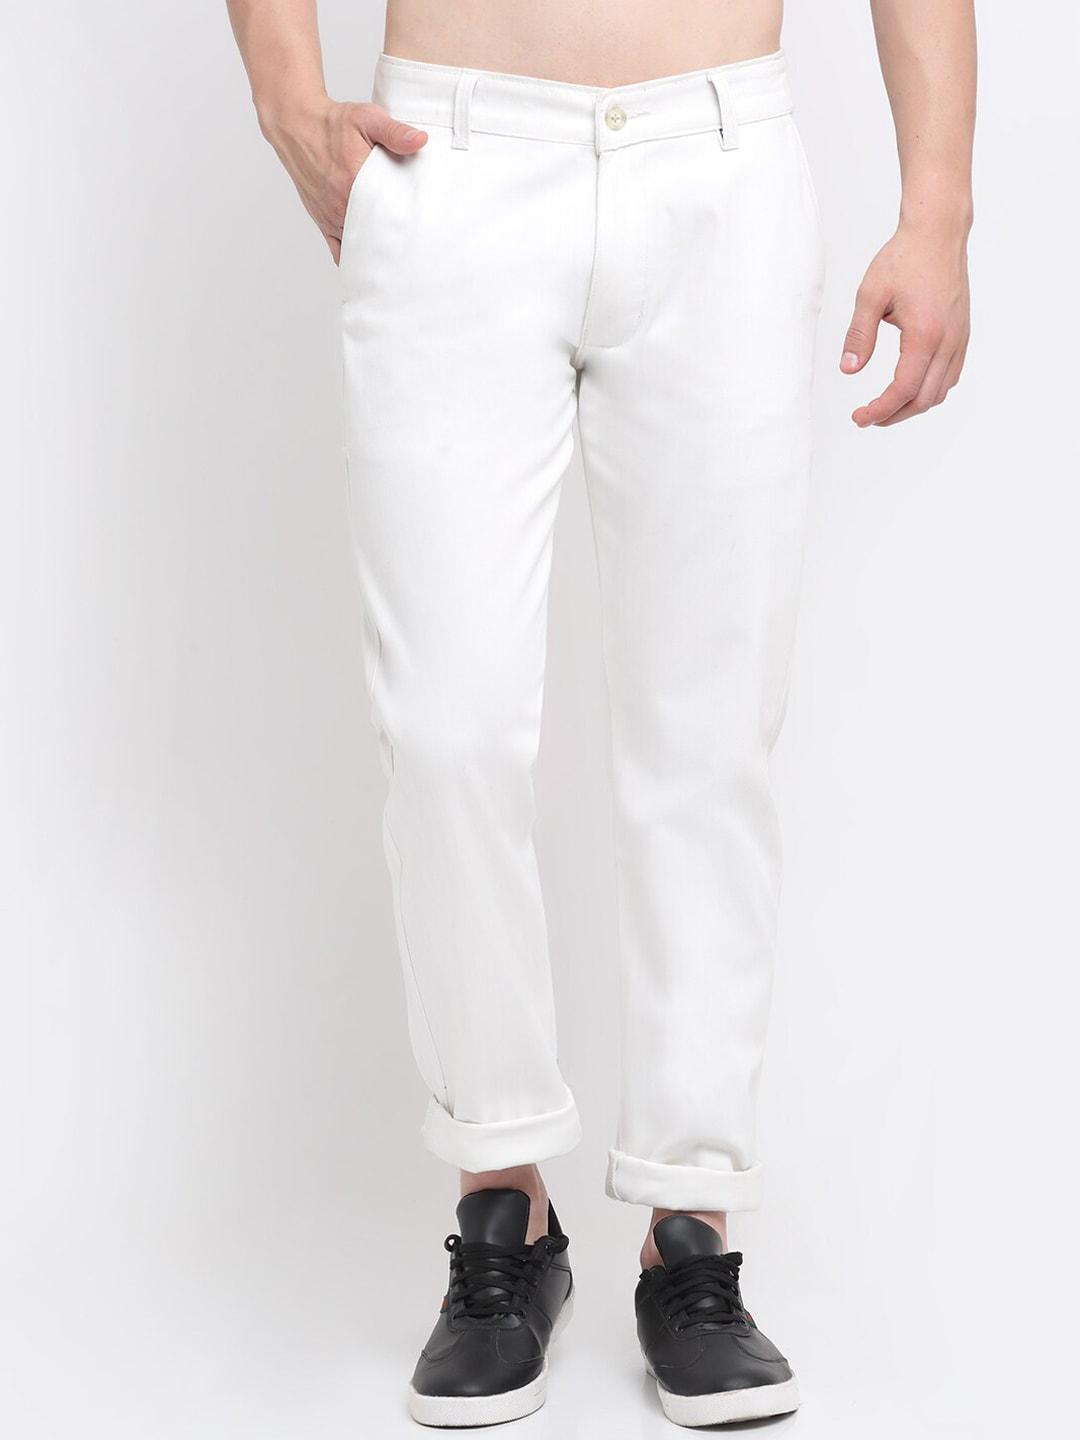 ennoble-men-off-white-smart-slim-fit-easy-wash-cotton-chinos-trousers